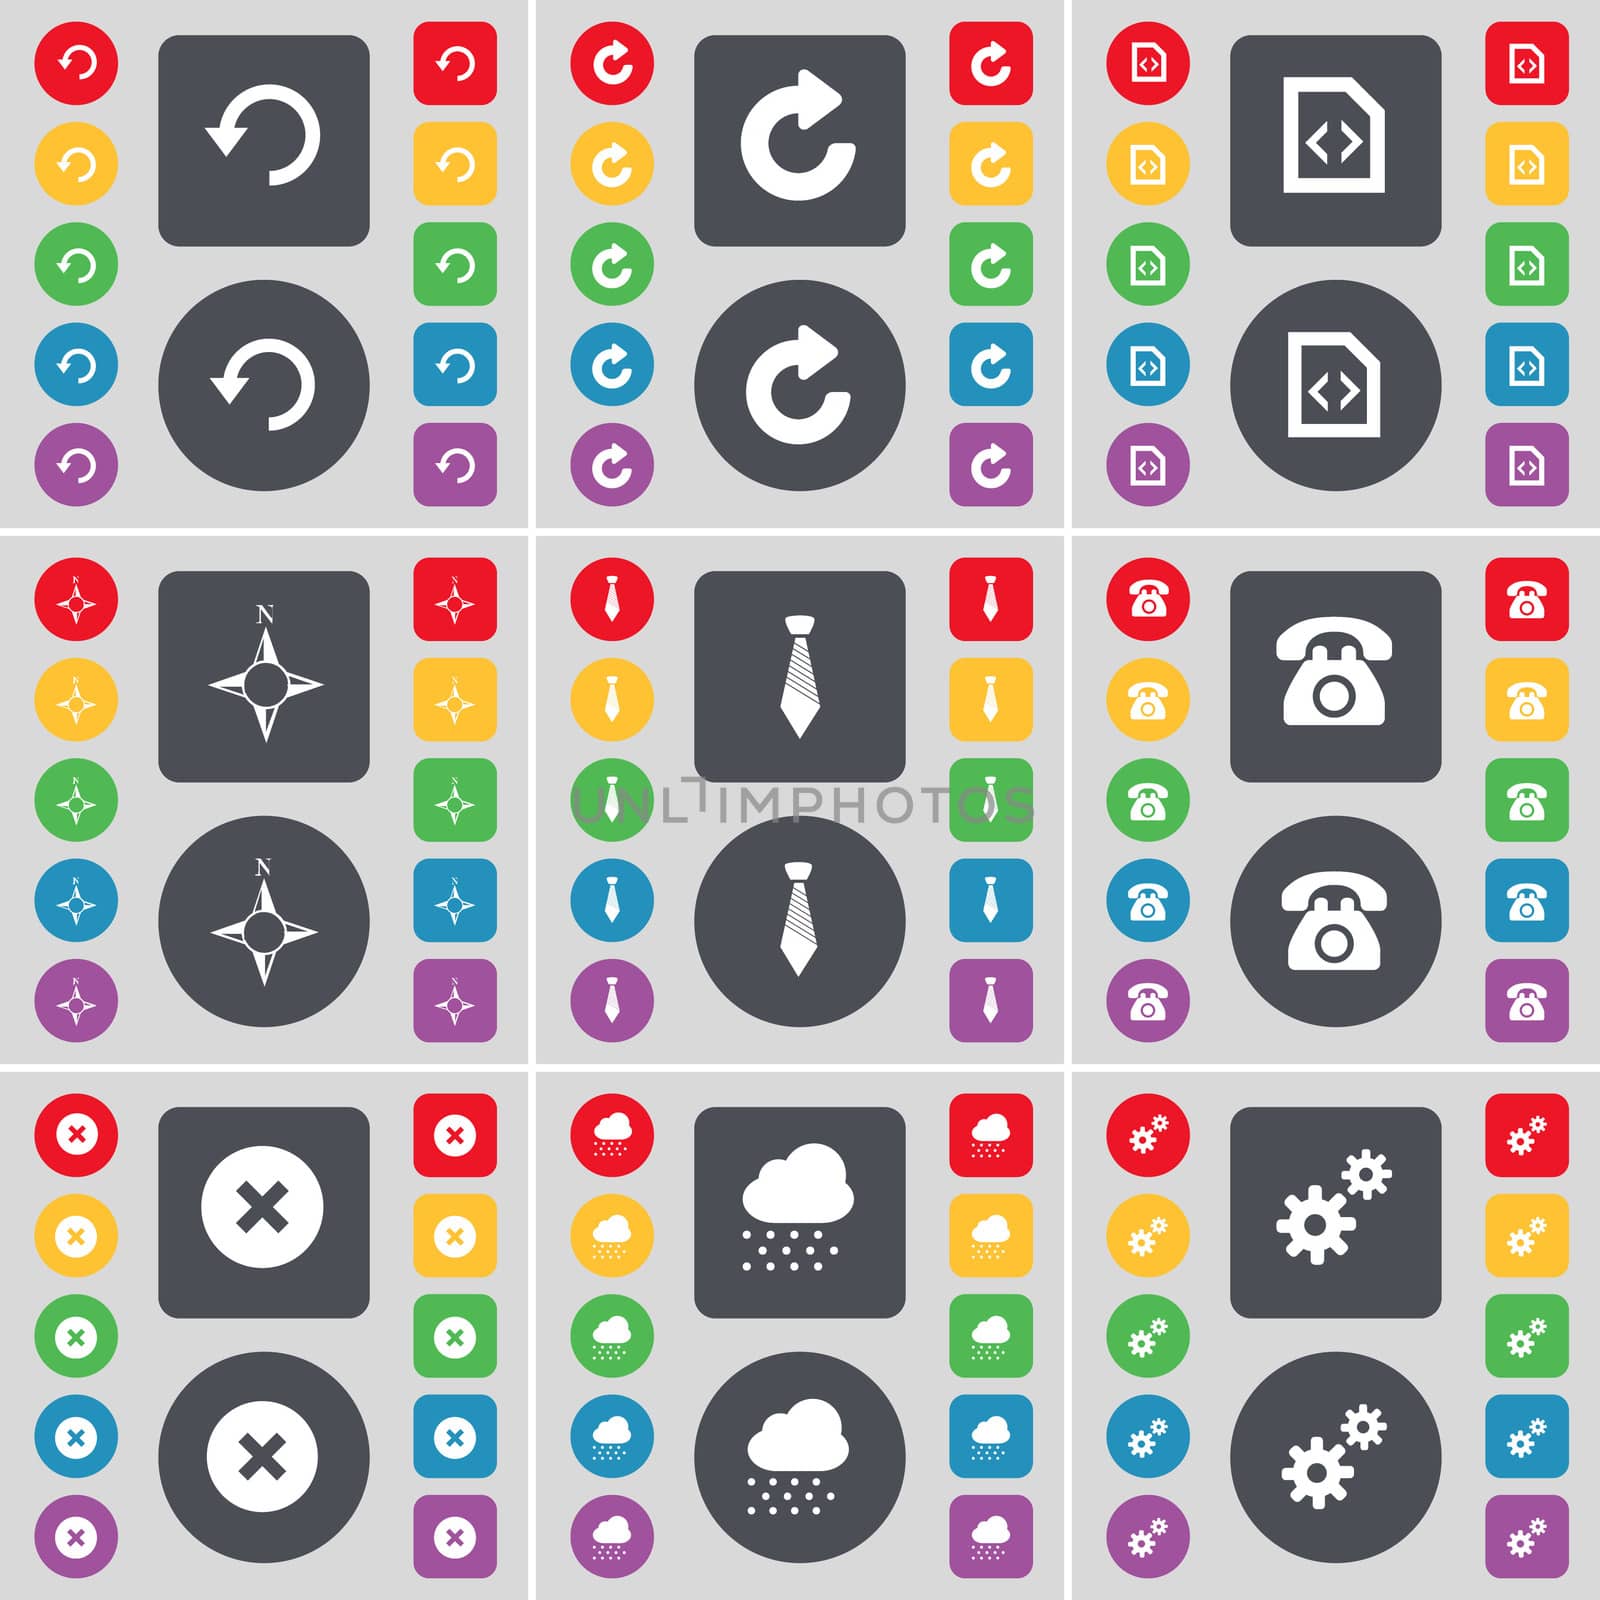 Reload, File, Compass, Tie, Retro phone, Stop, Cloud, Gear icon symbol. A large set of flat, colored buttons for your design. illustration